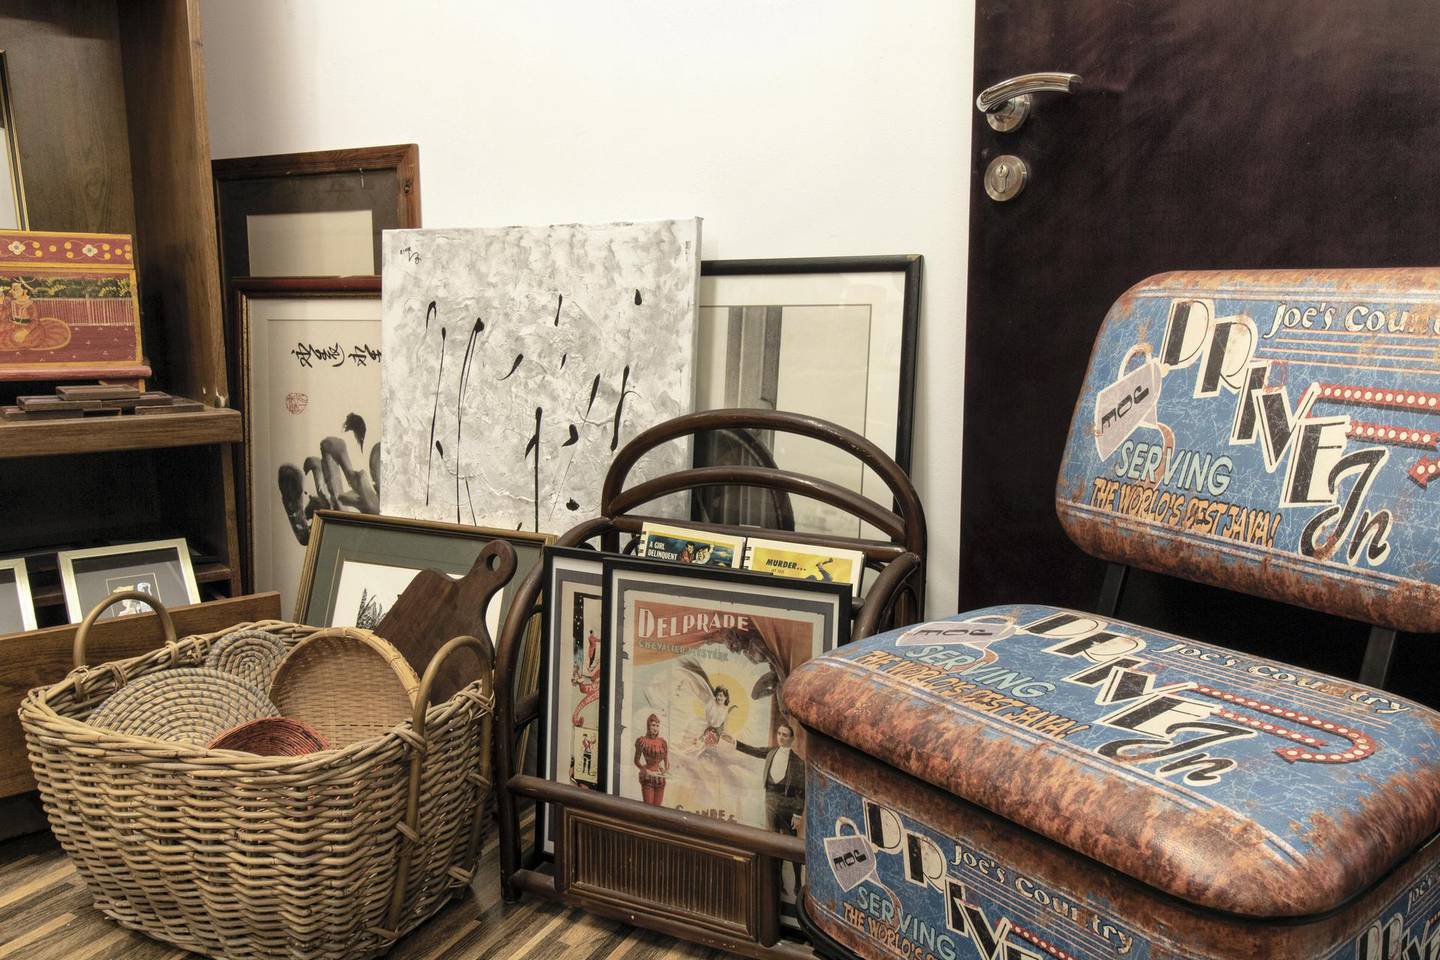 La Brocante houses an eclectic collection of second-hand furniture. Courtesy La Brocante